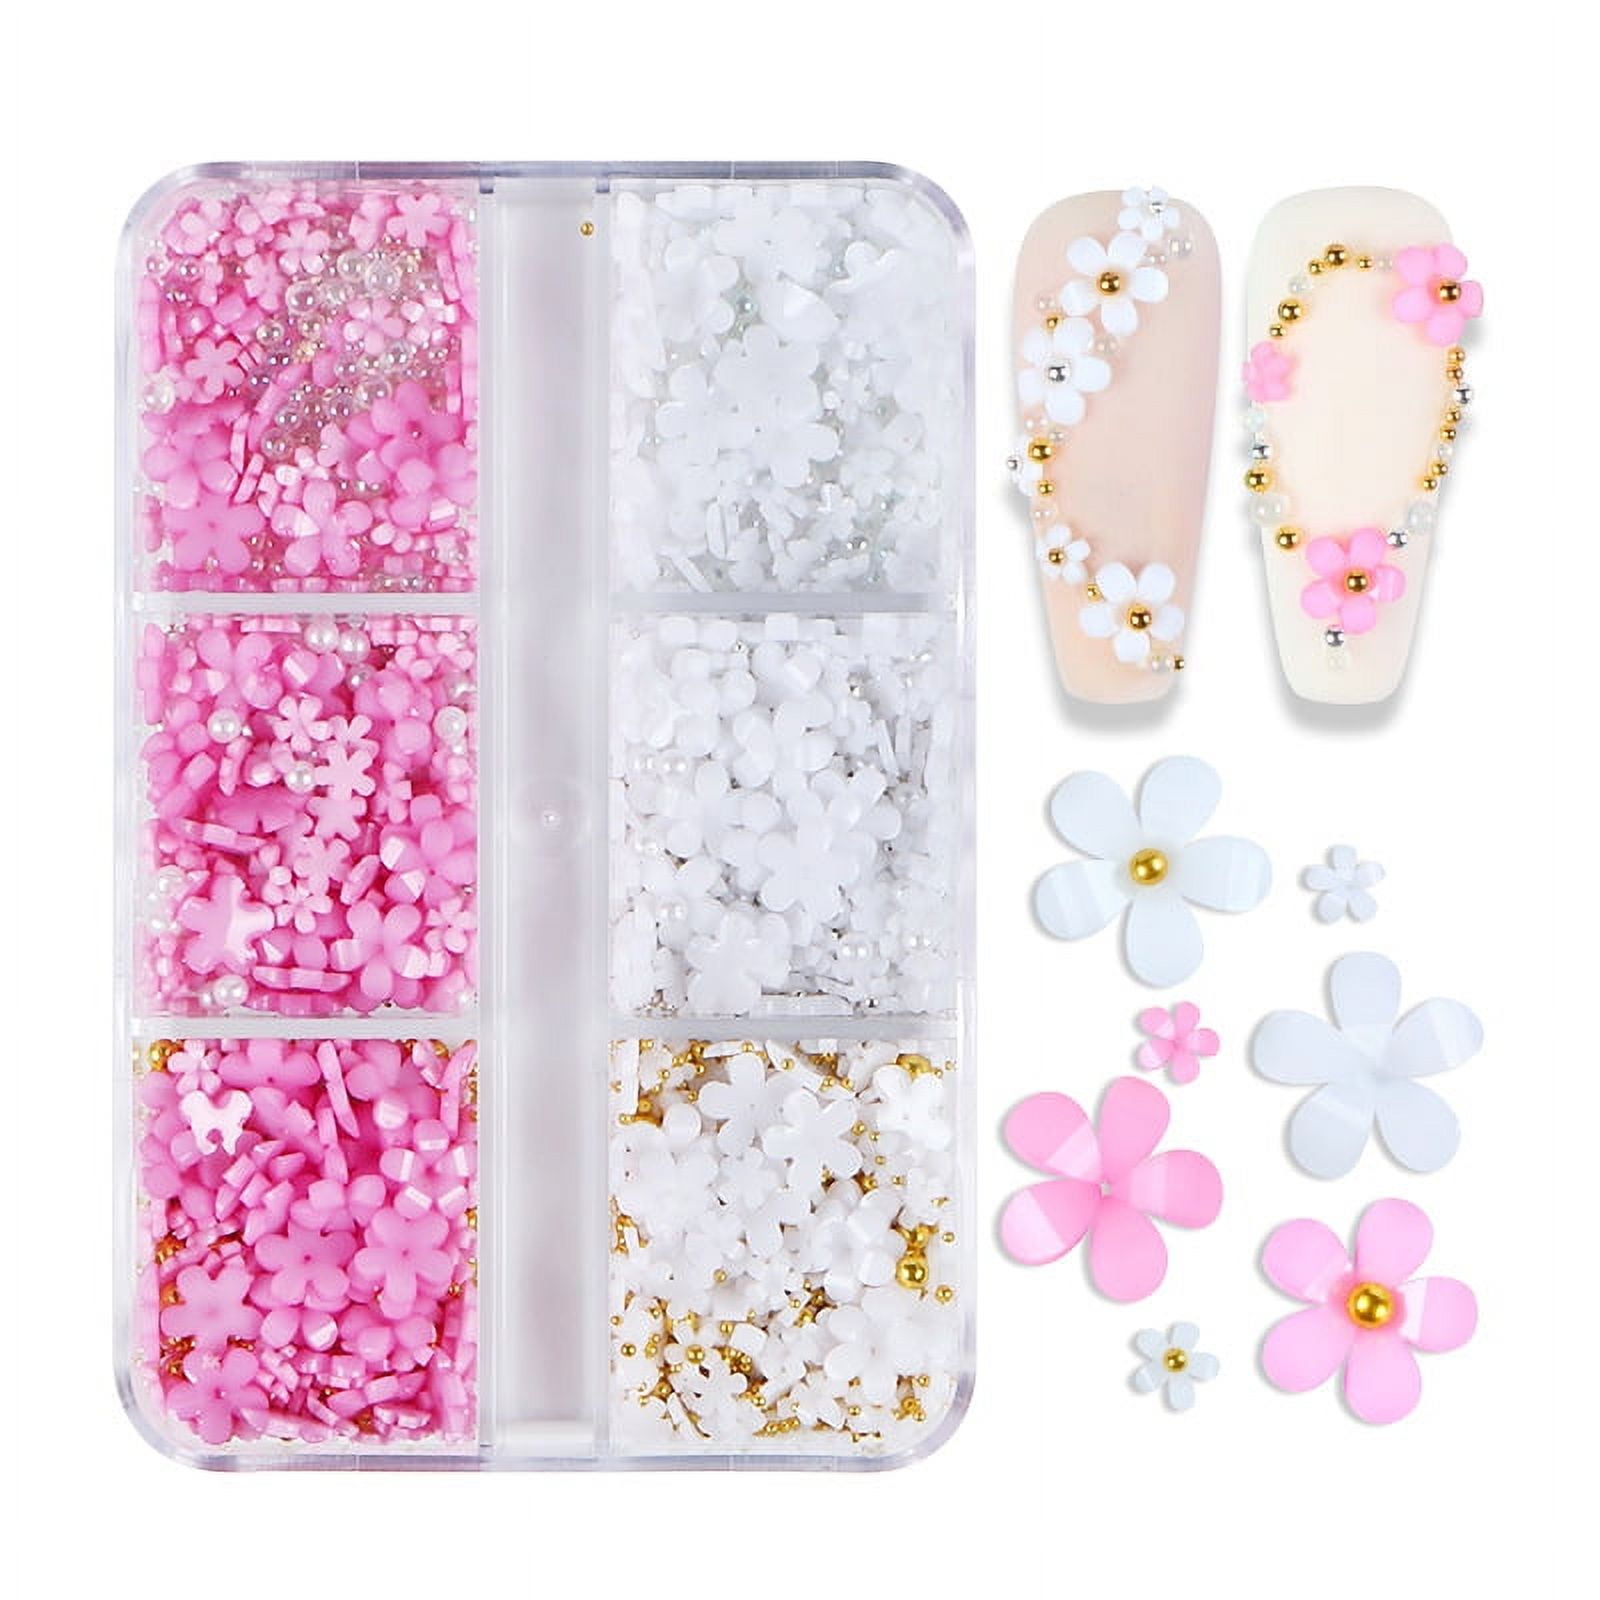 3D Flower Nail Charms TEOYALL 2 Boxes Acrylic Flowers for Nail Art Design  with Gold and Silver Caviar Beads Manicure DIY Decorations (2 Multicolor)